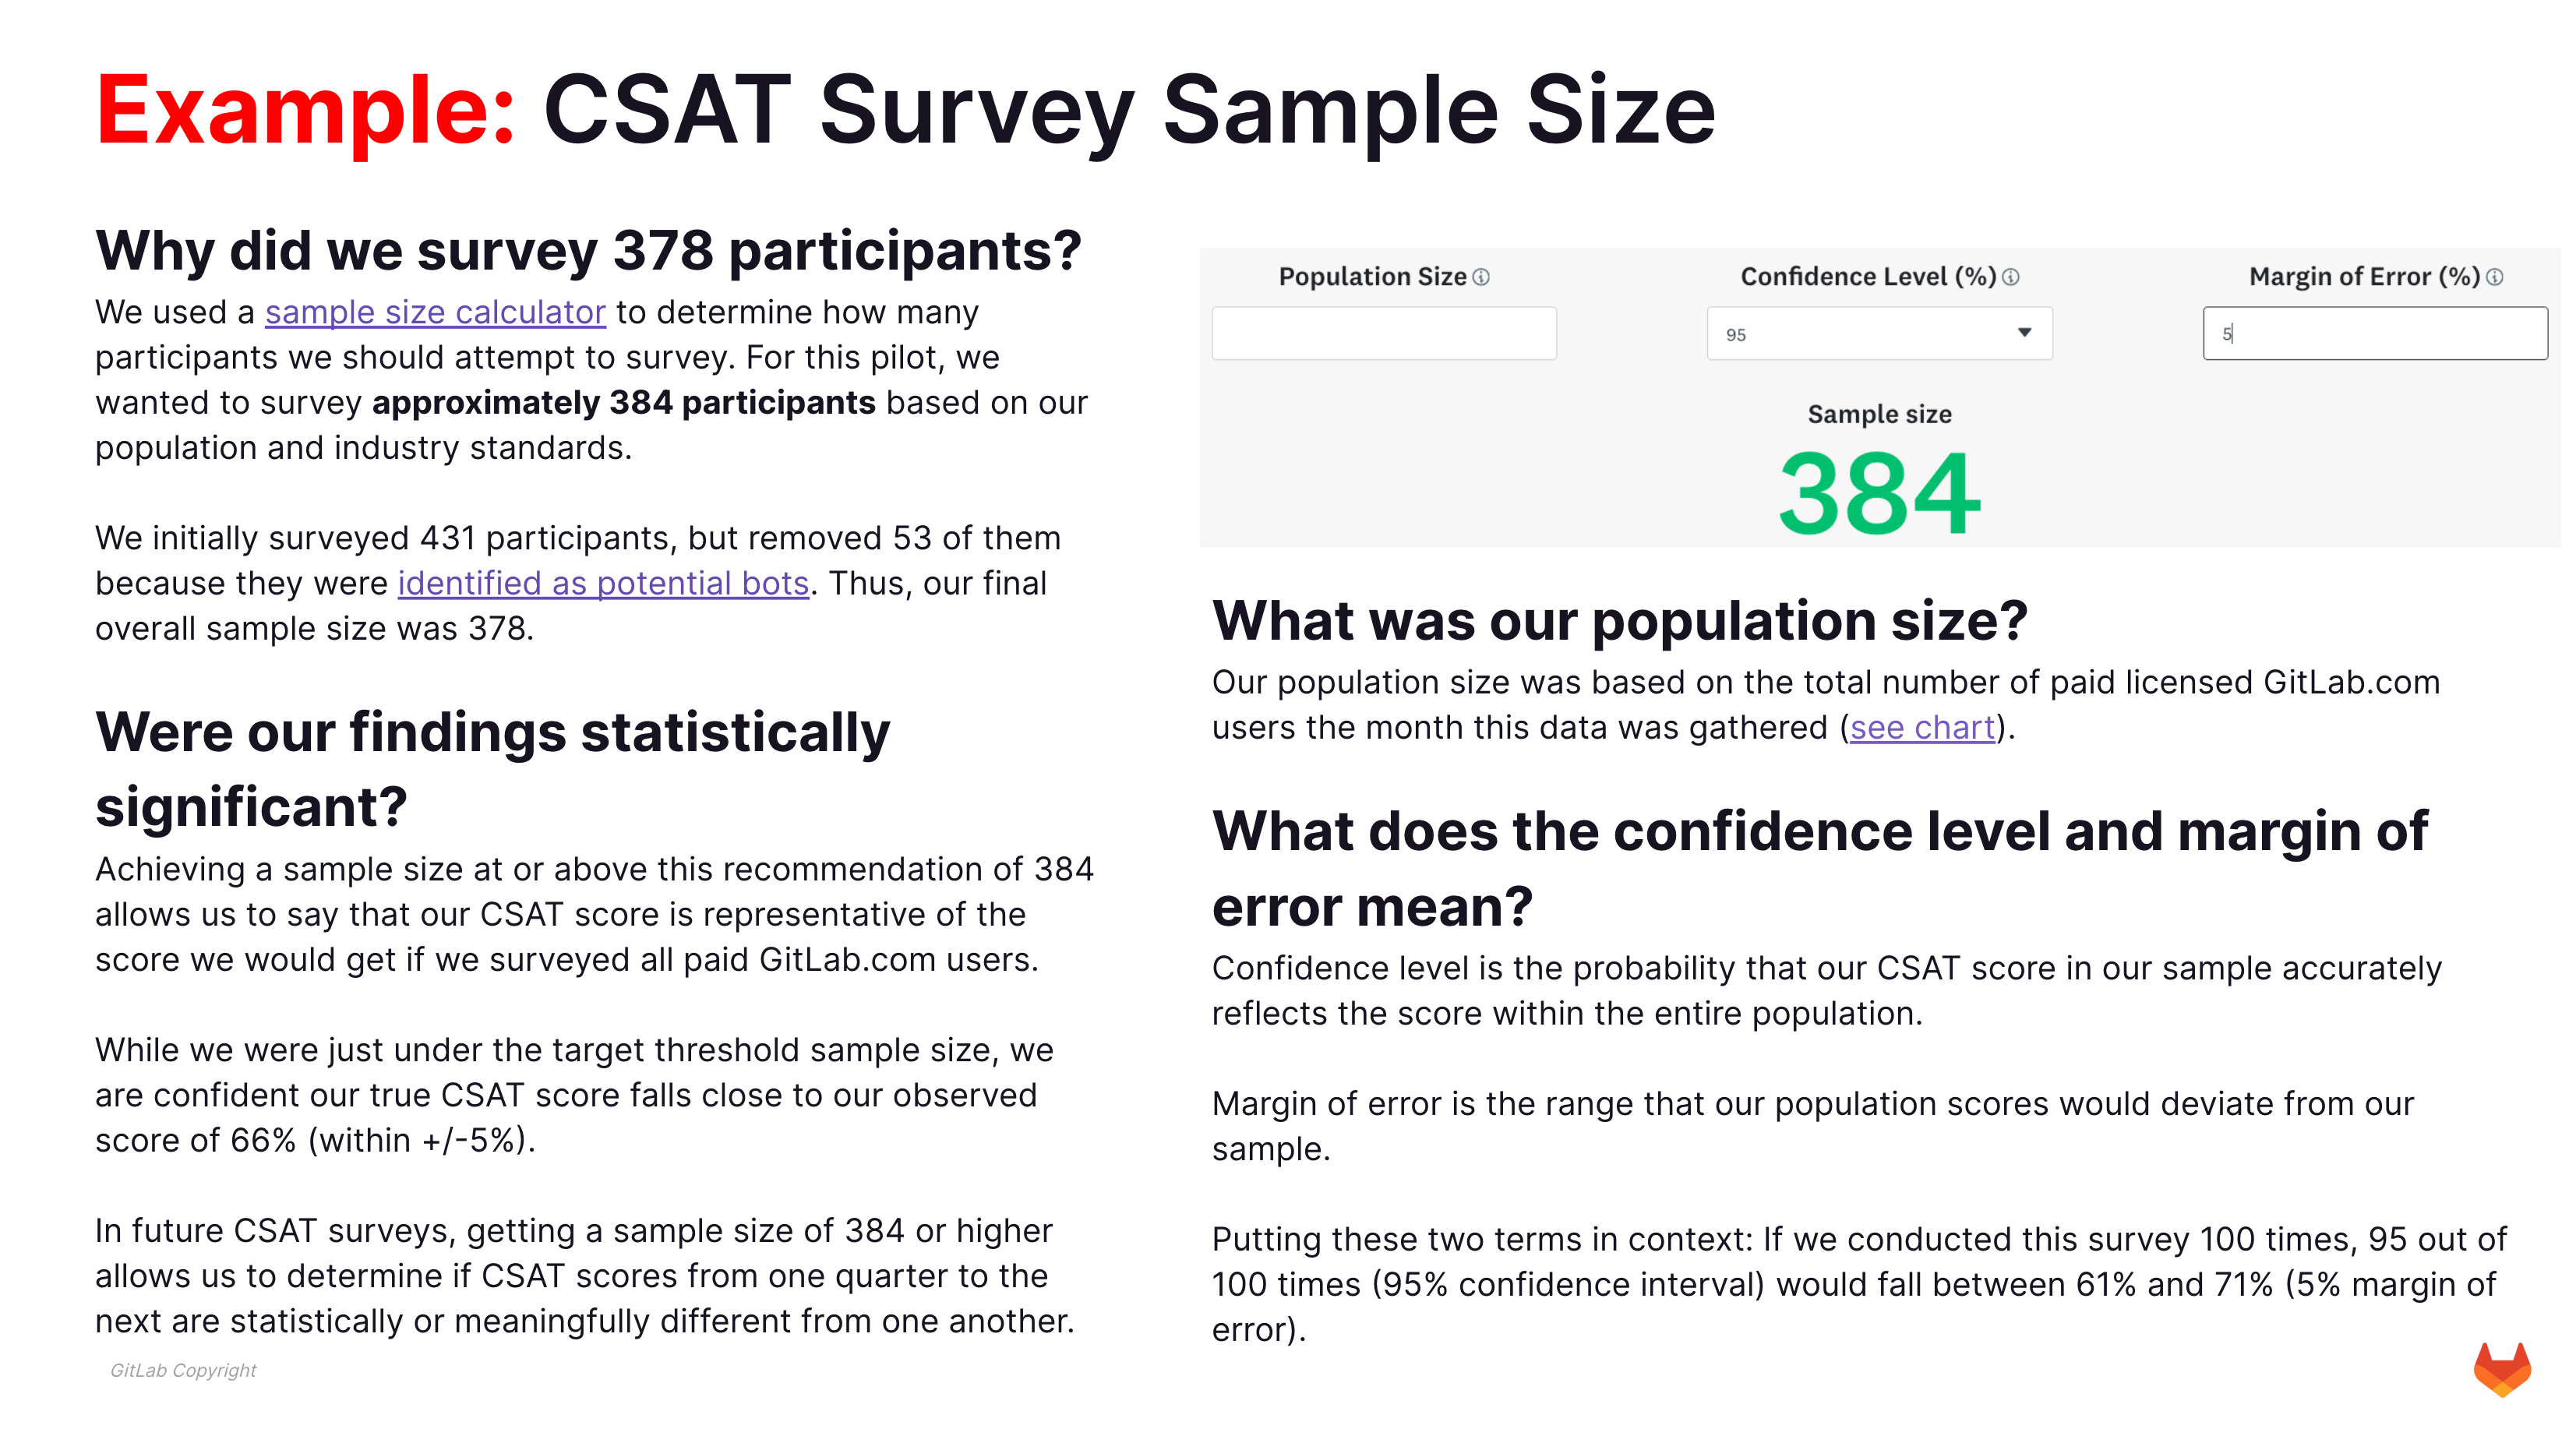 Example slide reporting sample size